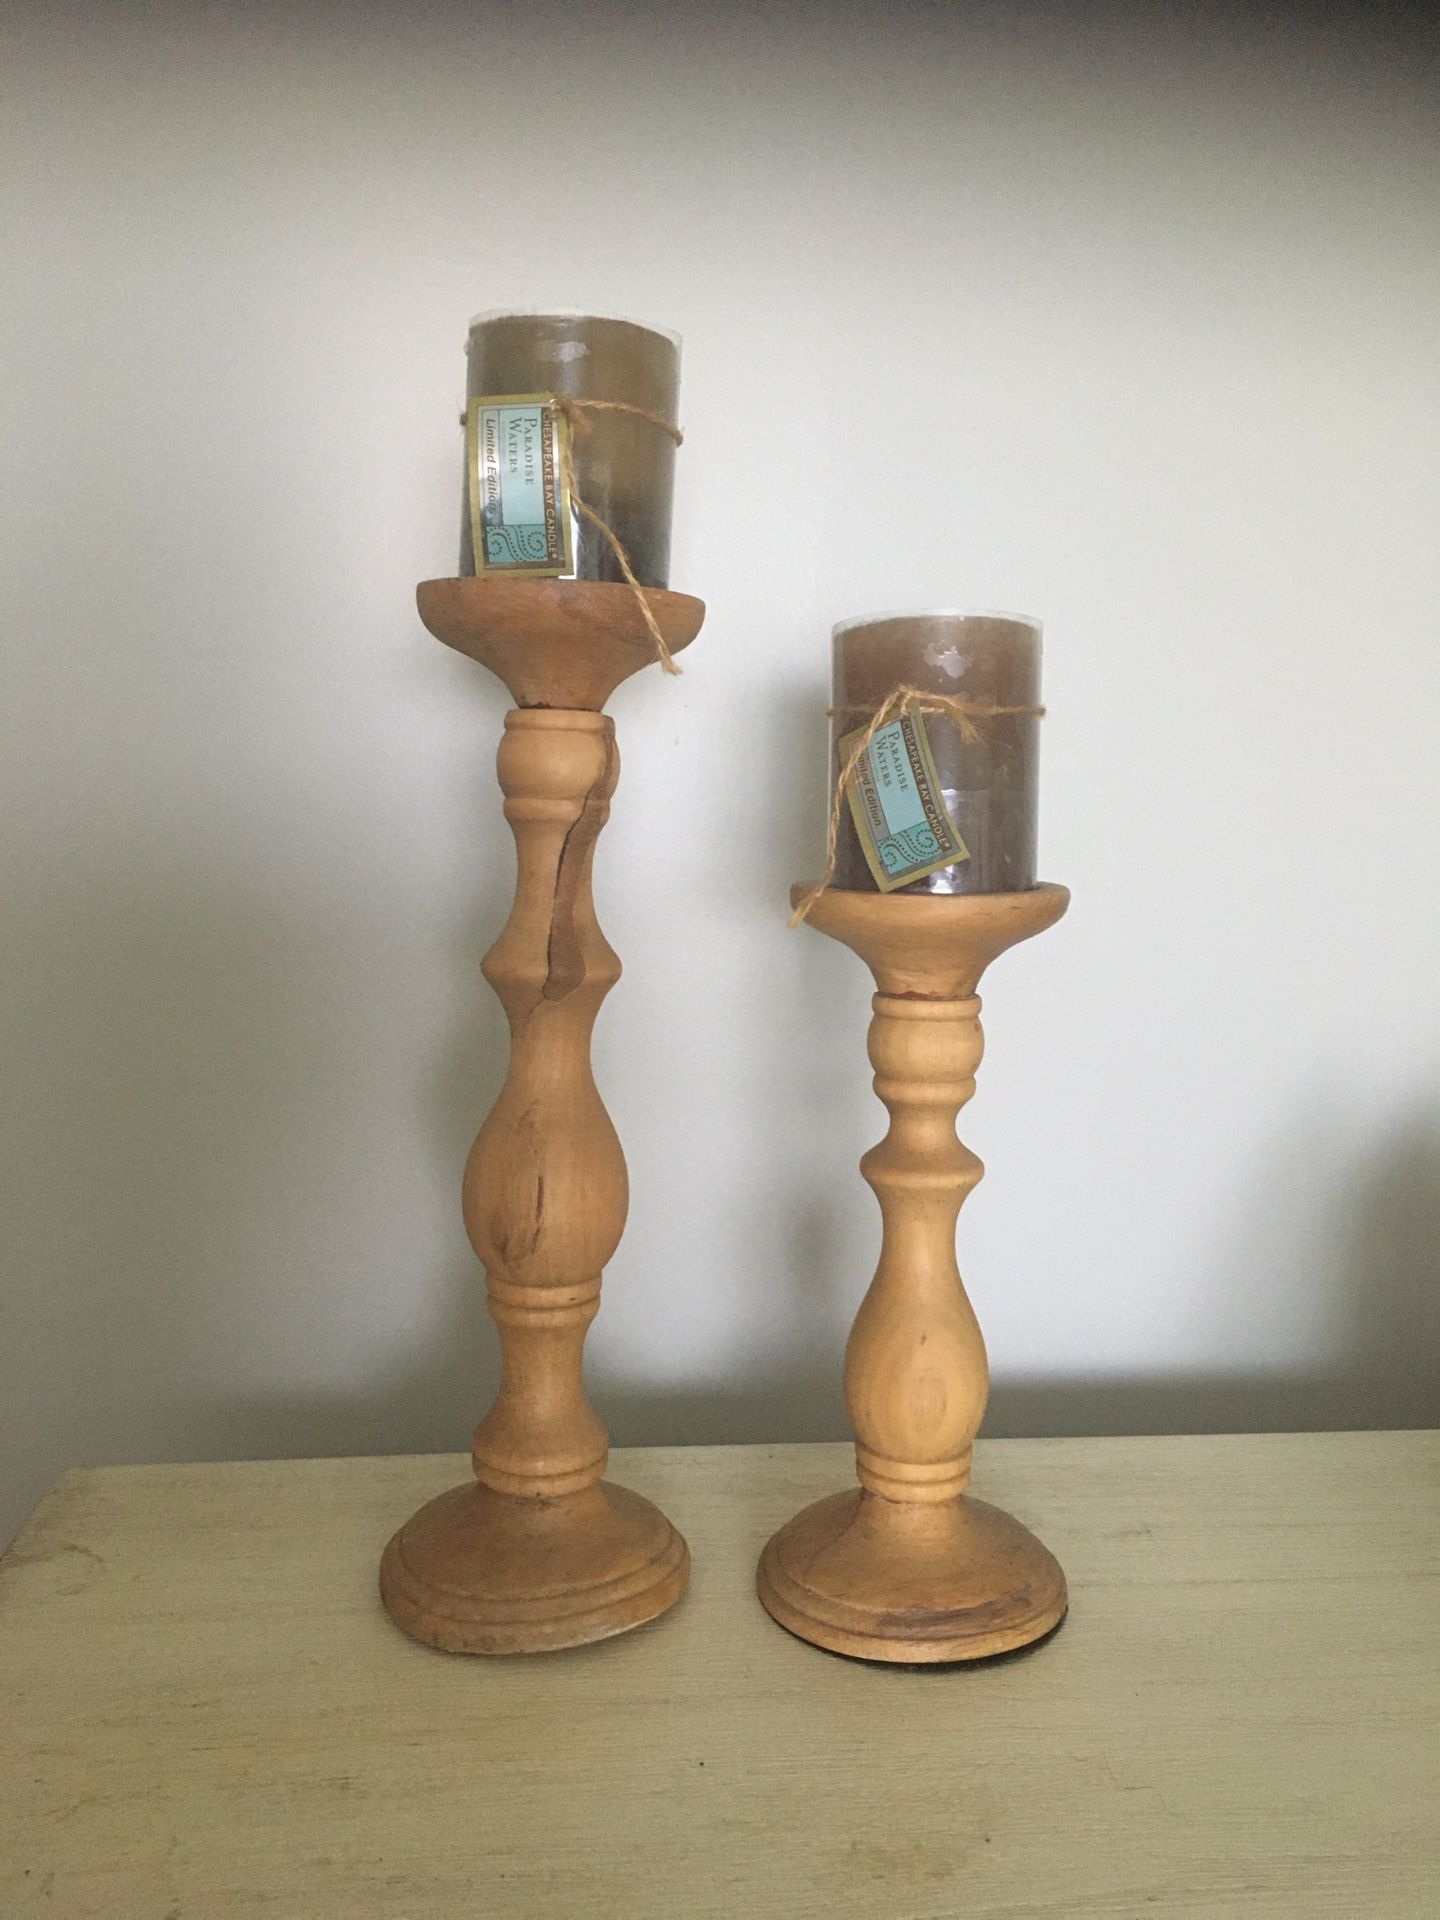 All Wood Pillar/Candle Holders and Paradise Waters Candles